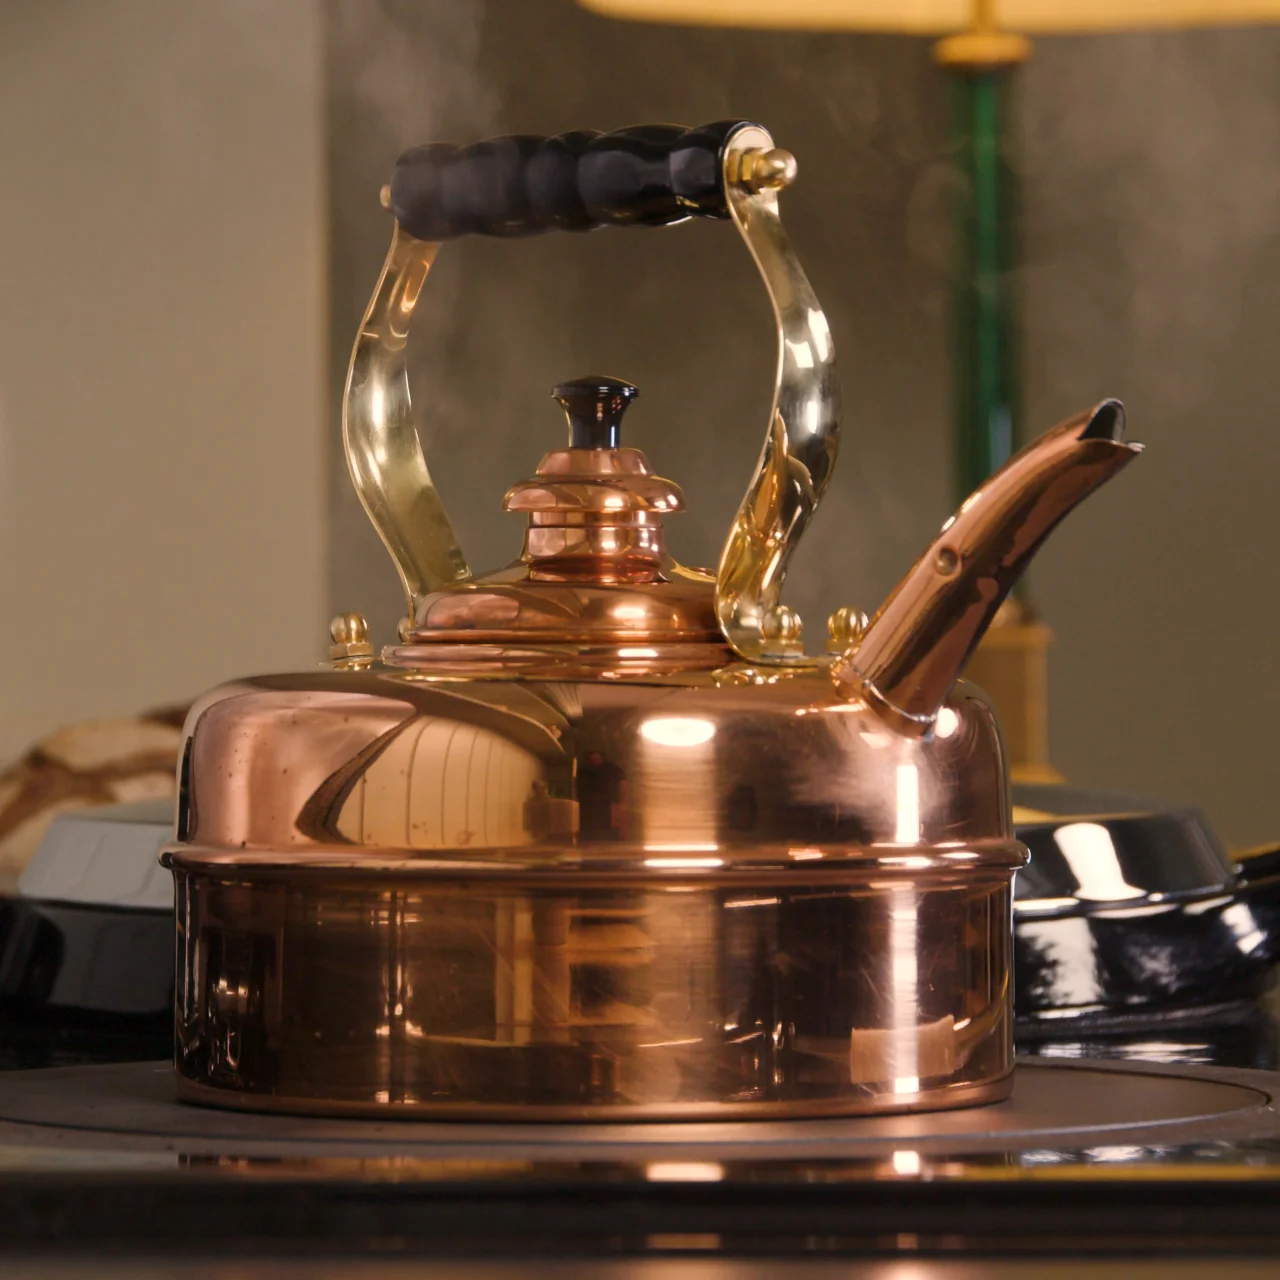 Richmond Induction Copper Whistling Tea Kettle - No. 7